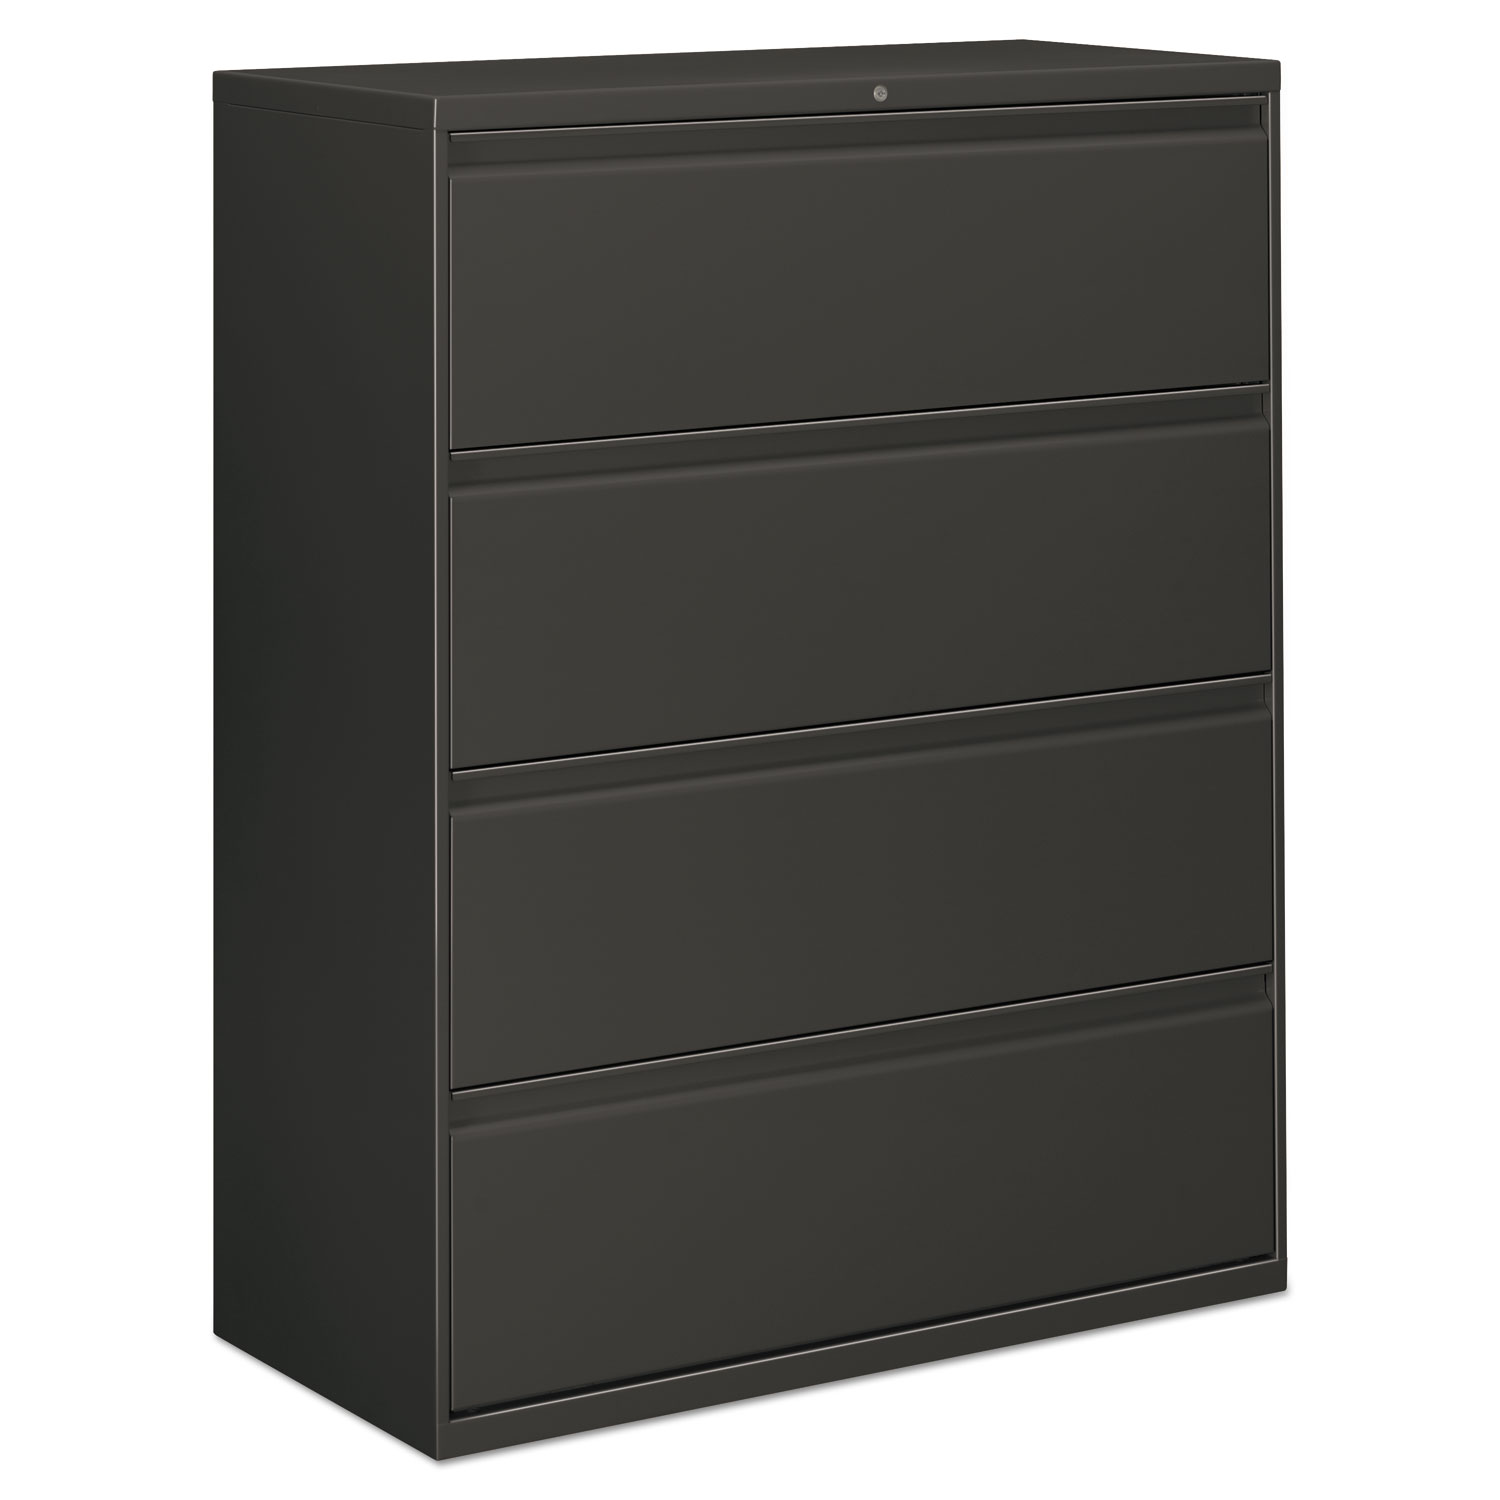 Alera Four-drawer Lateral File Cabinet, 42w X 18d X 52.5h, Charcoal - image 1 of 2